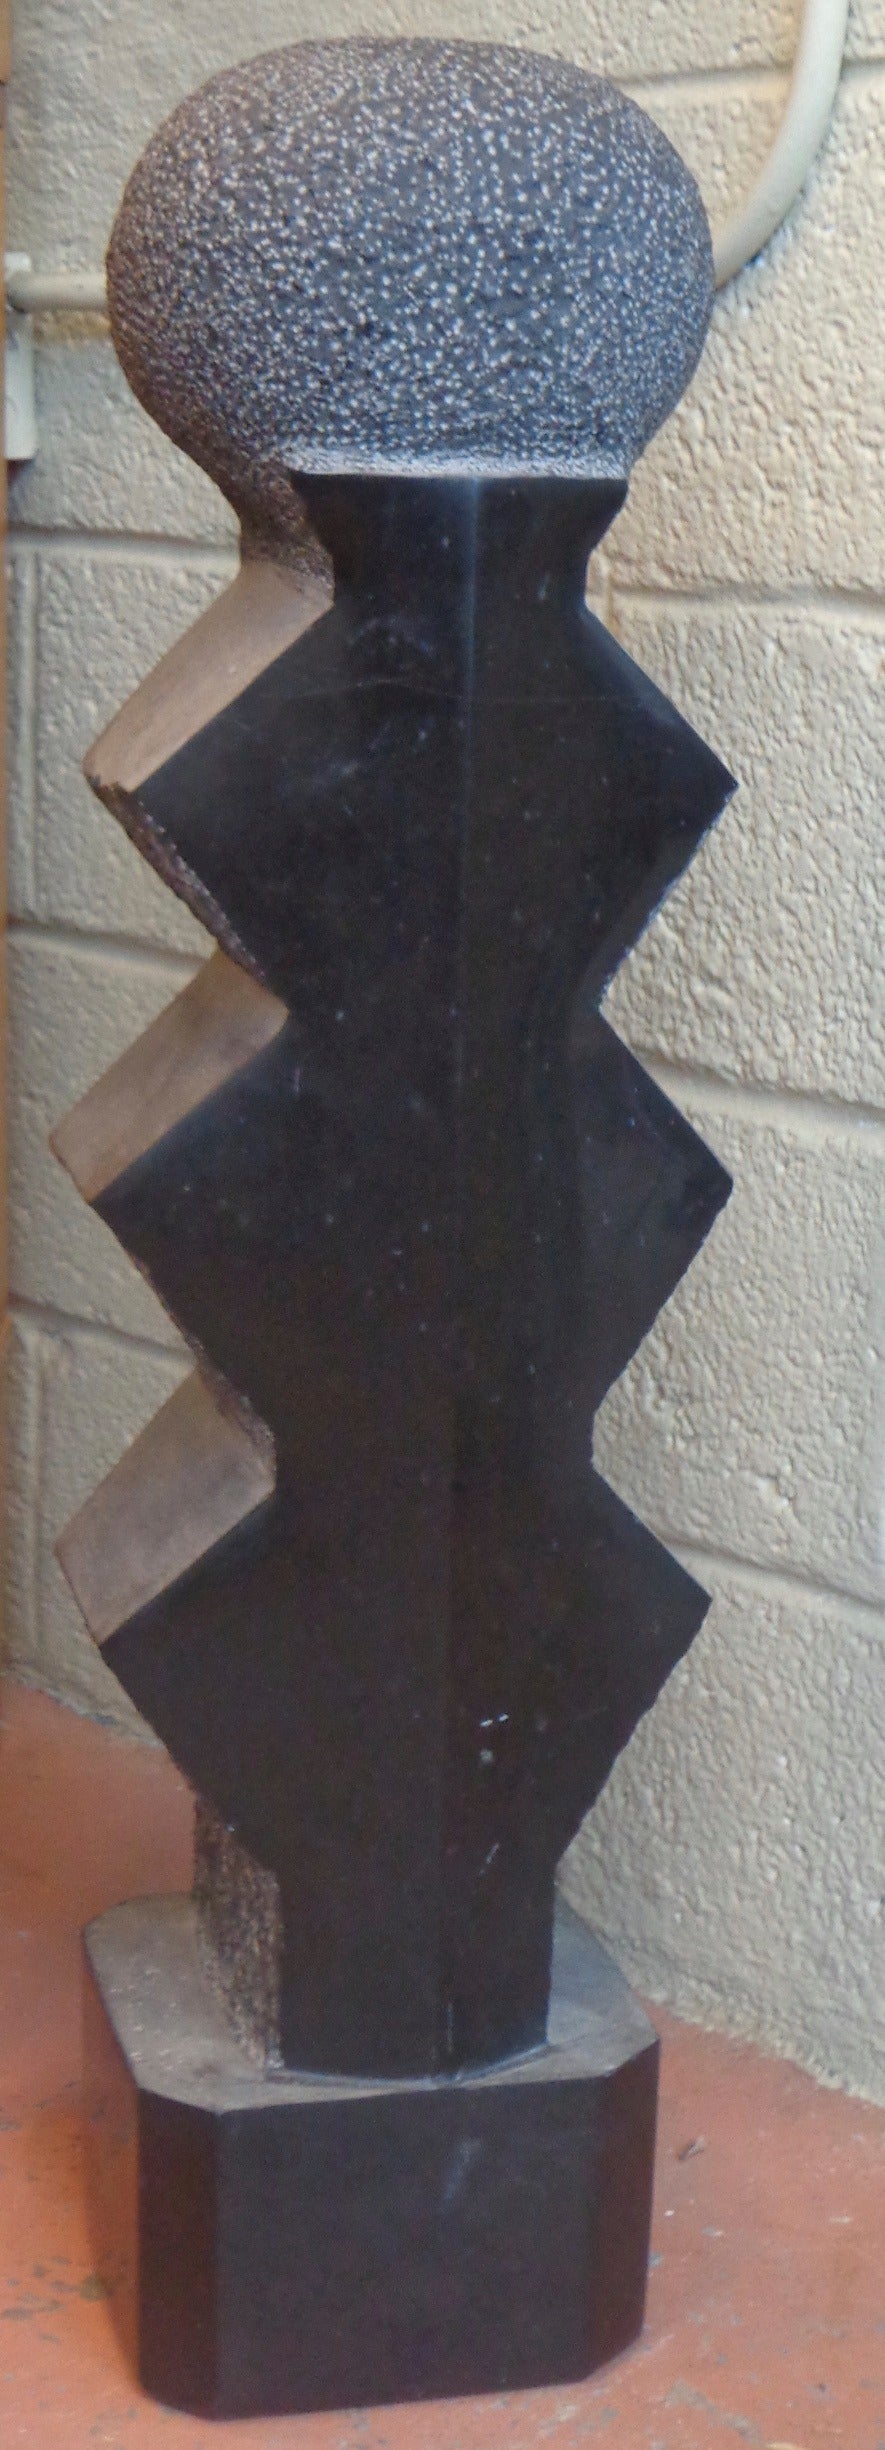 Brancusi inspired chiseled granite sculpture. Signed by artist.